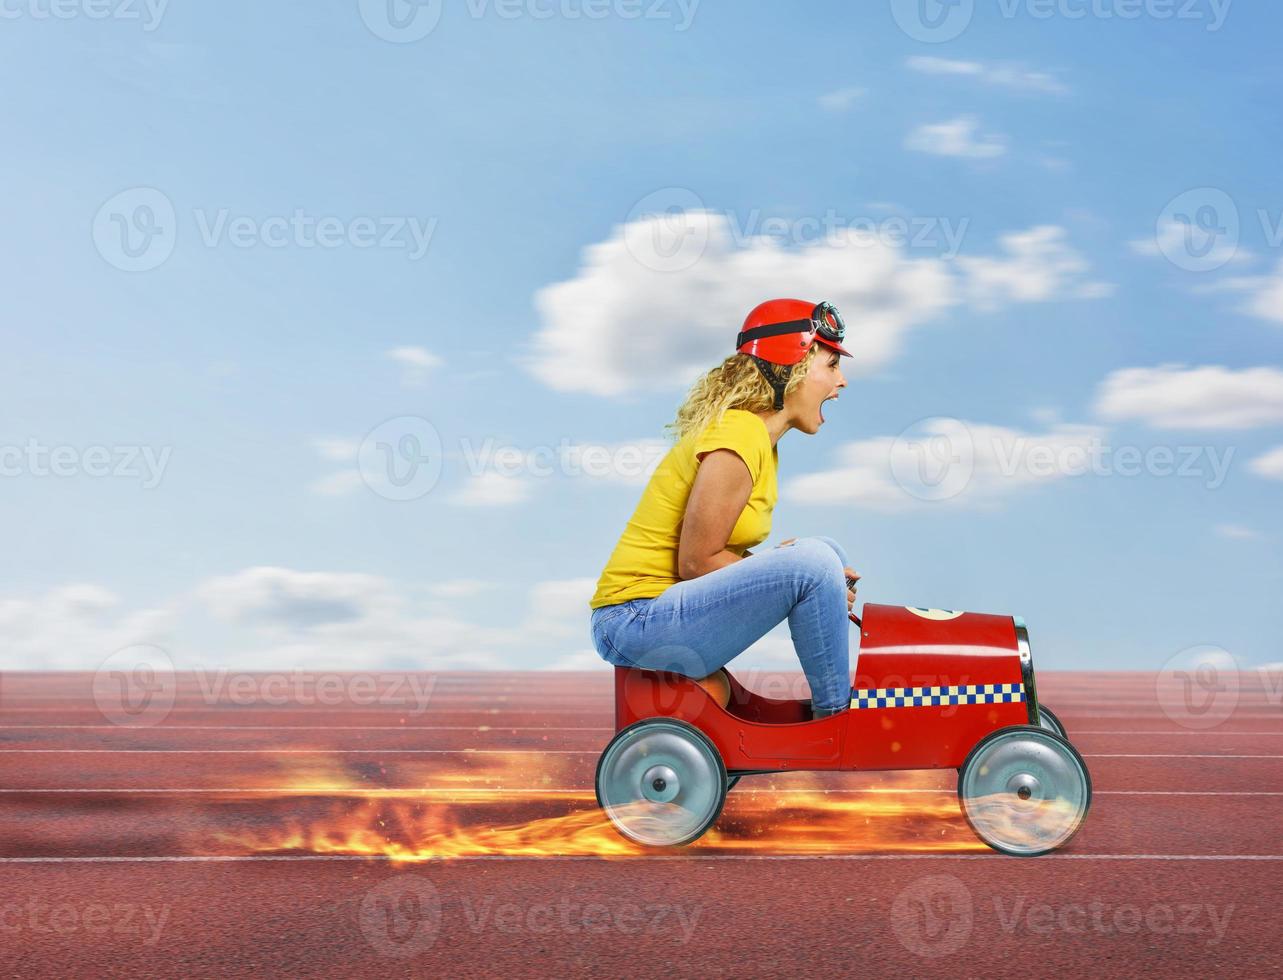 Woman with red helmet drives a fast toy car on the track photo